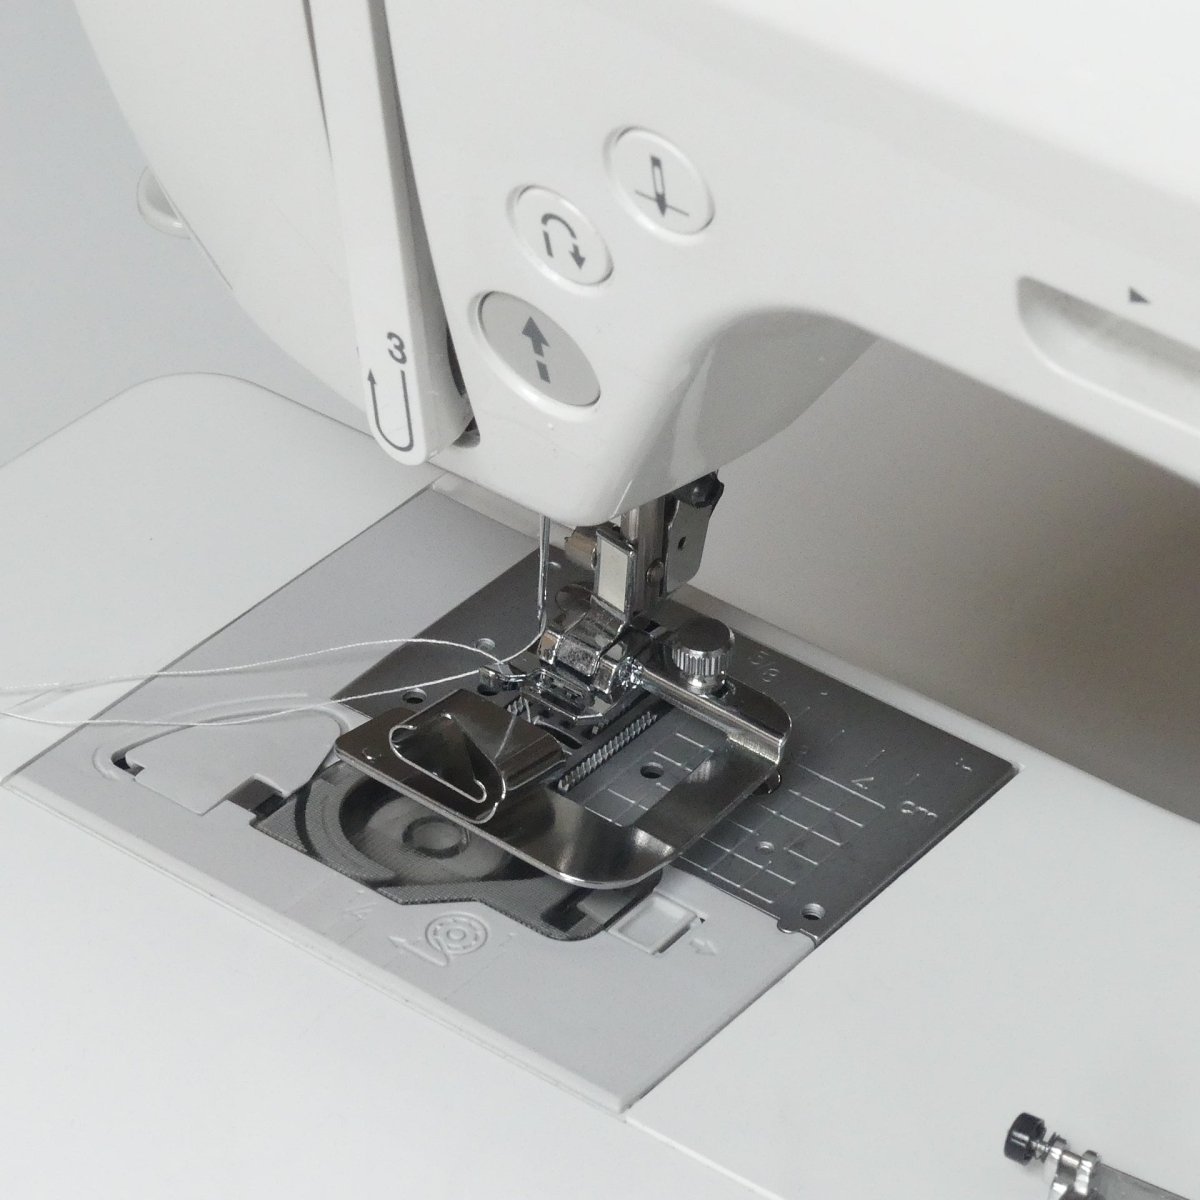 Hemming presser foot on a sewing machine